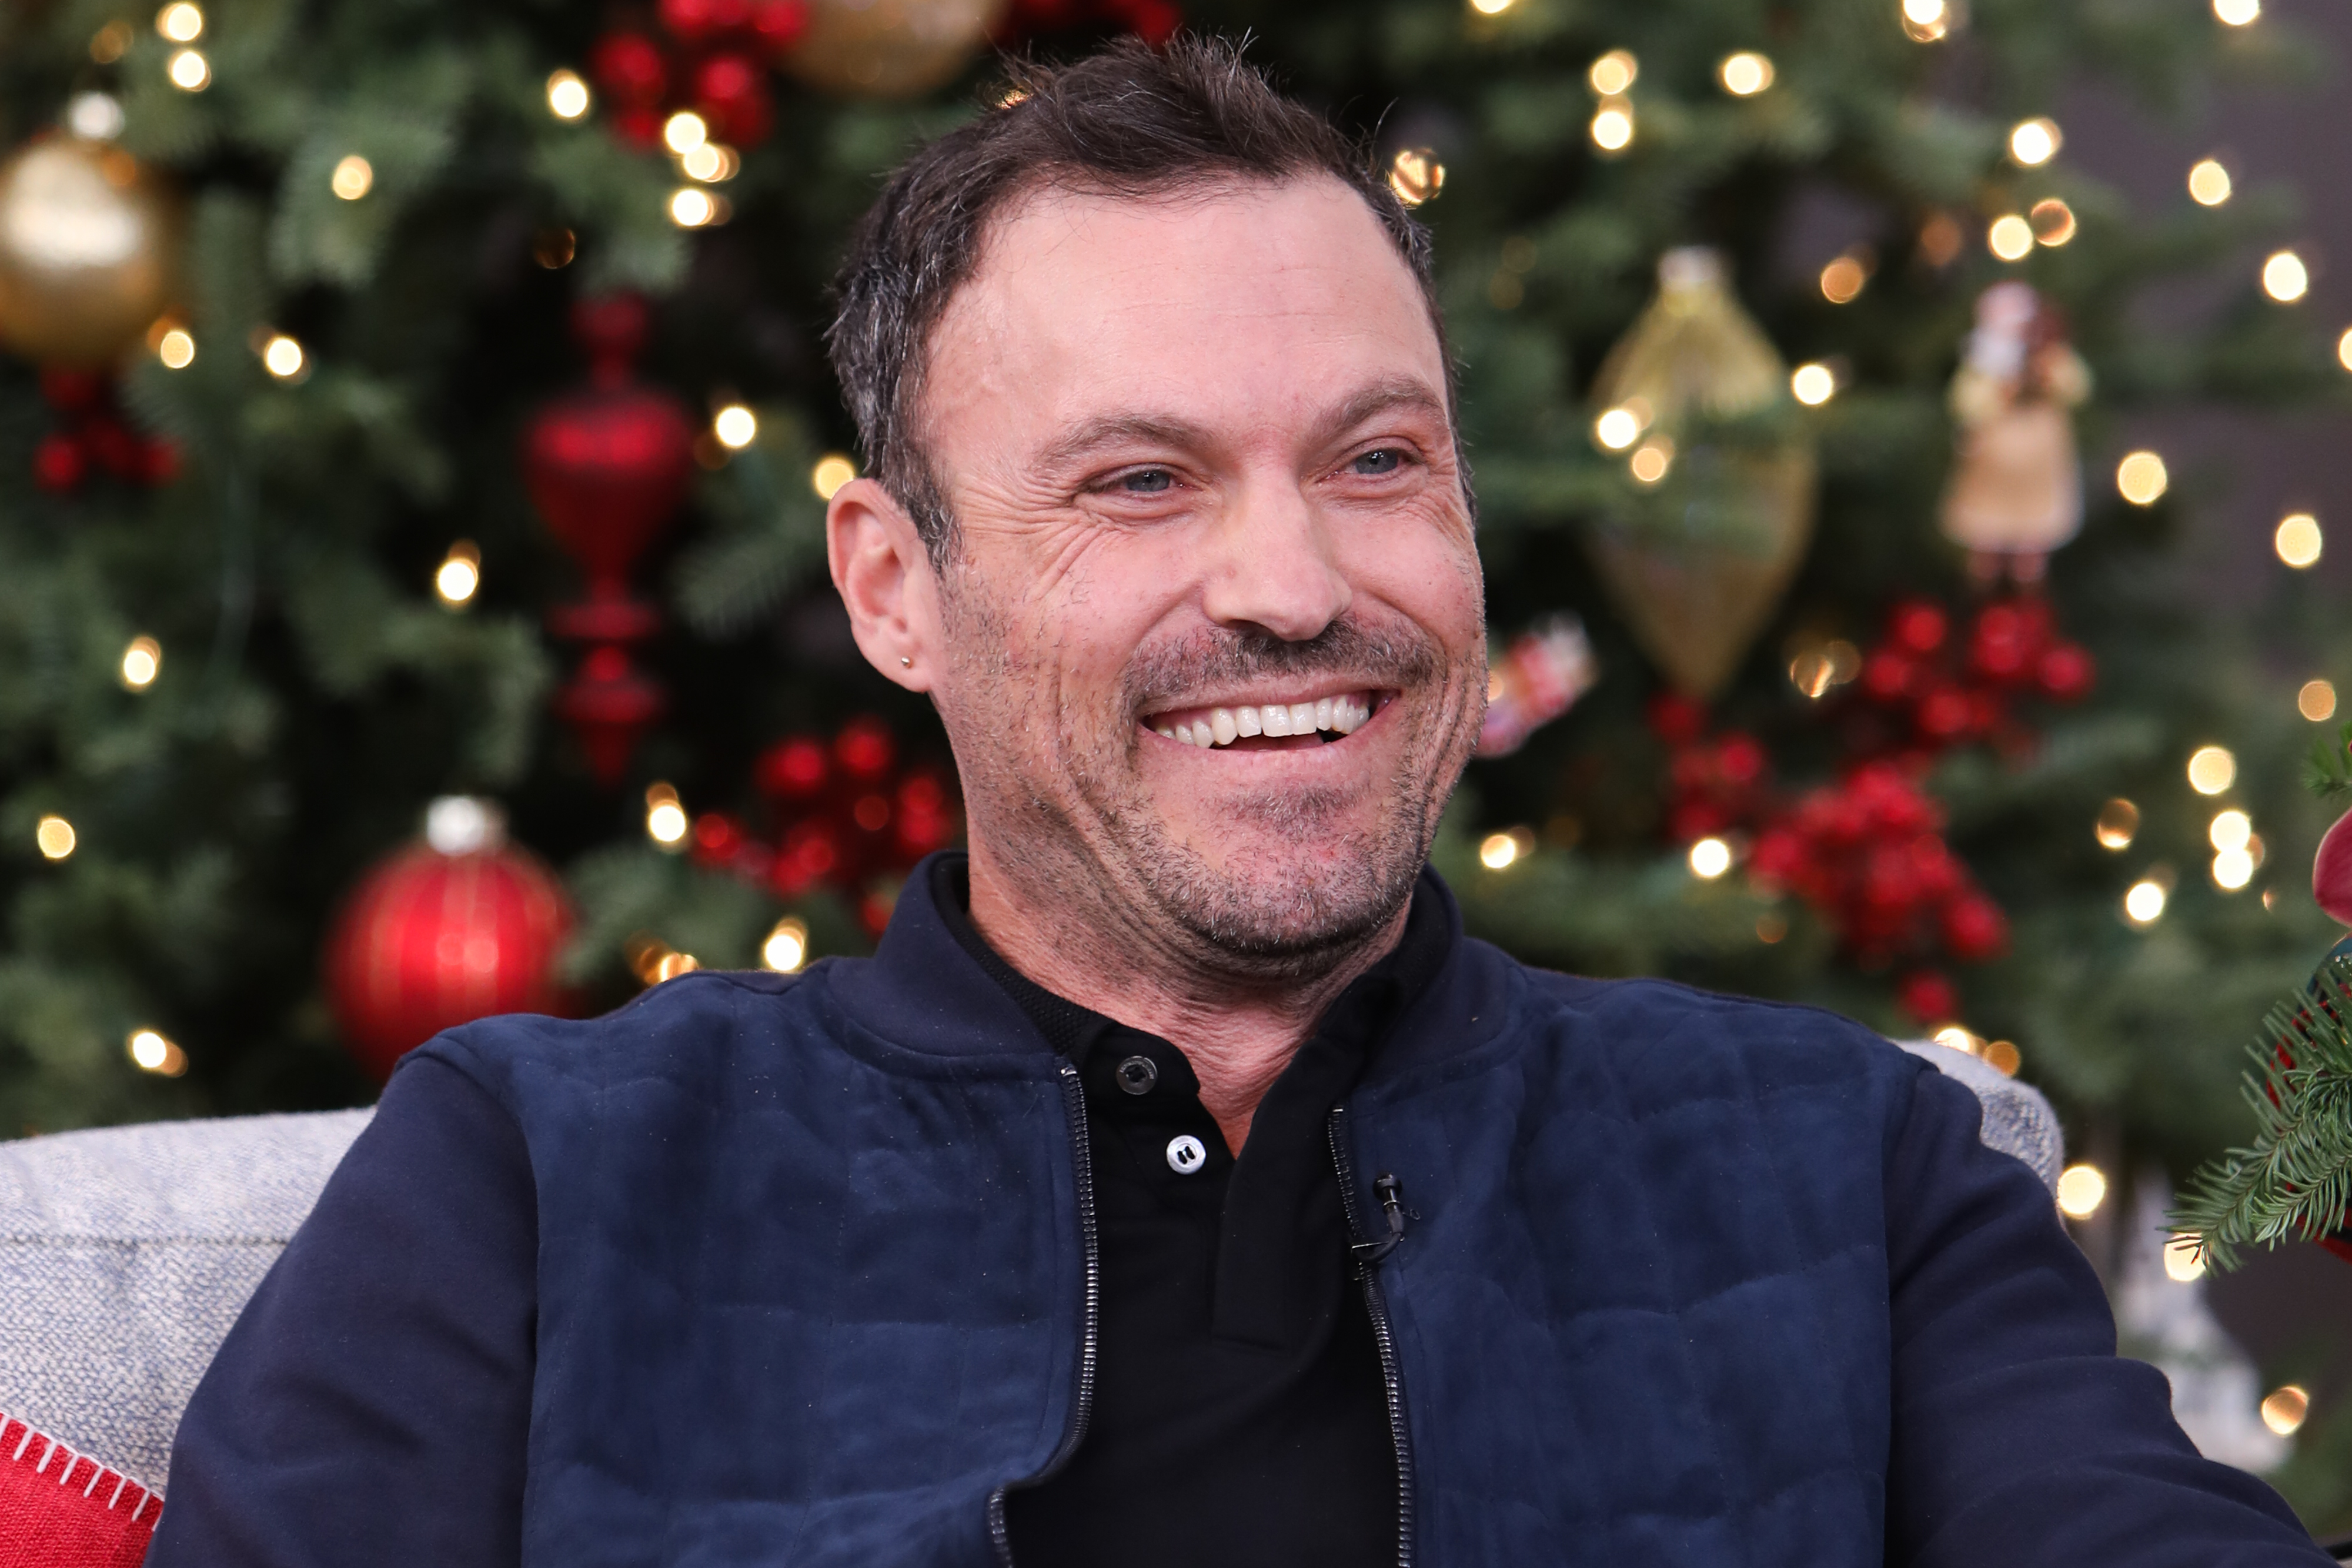 Brian Austin Green visits Hallmark Channel's "Home & Family" at Universal Studios Hollywood on November 15, 2019 in Universal City, California | Source: Getty Images